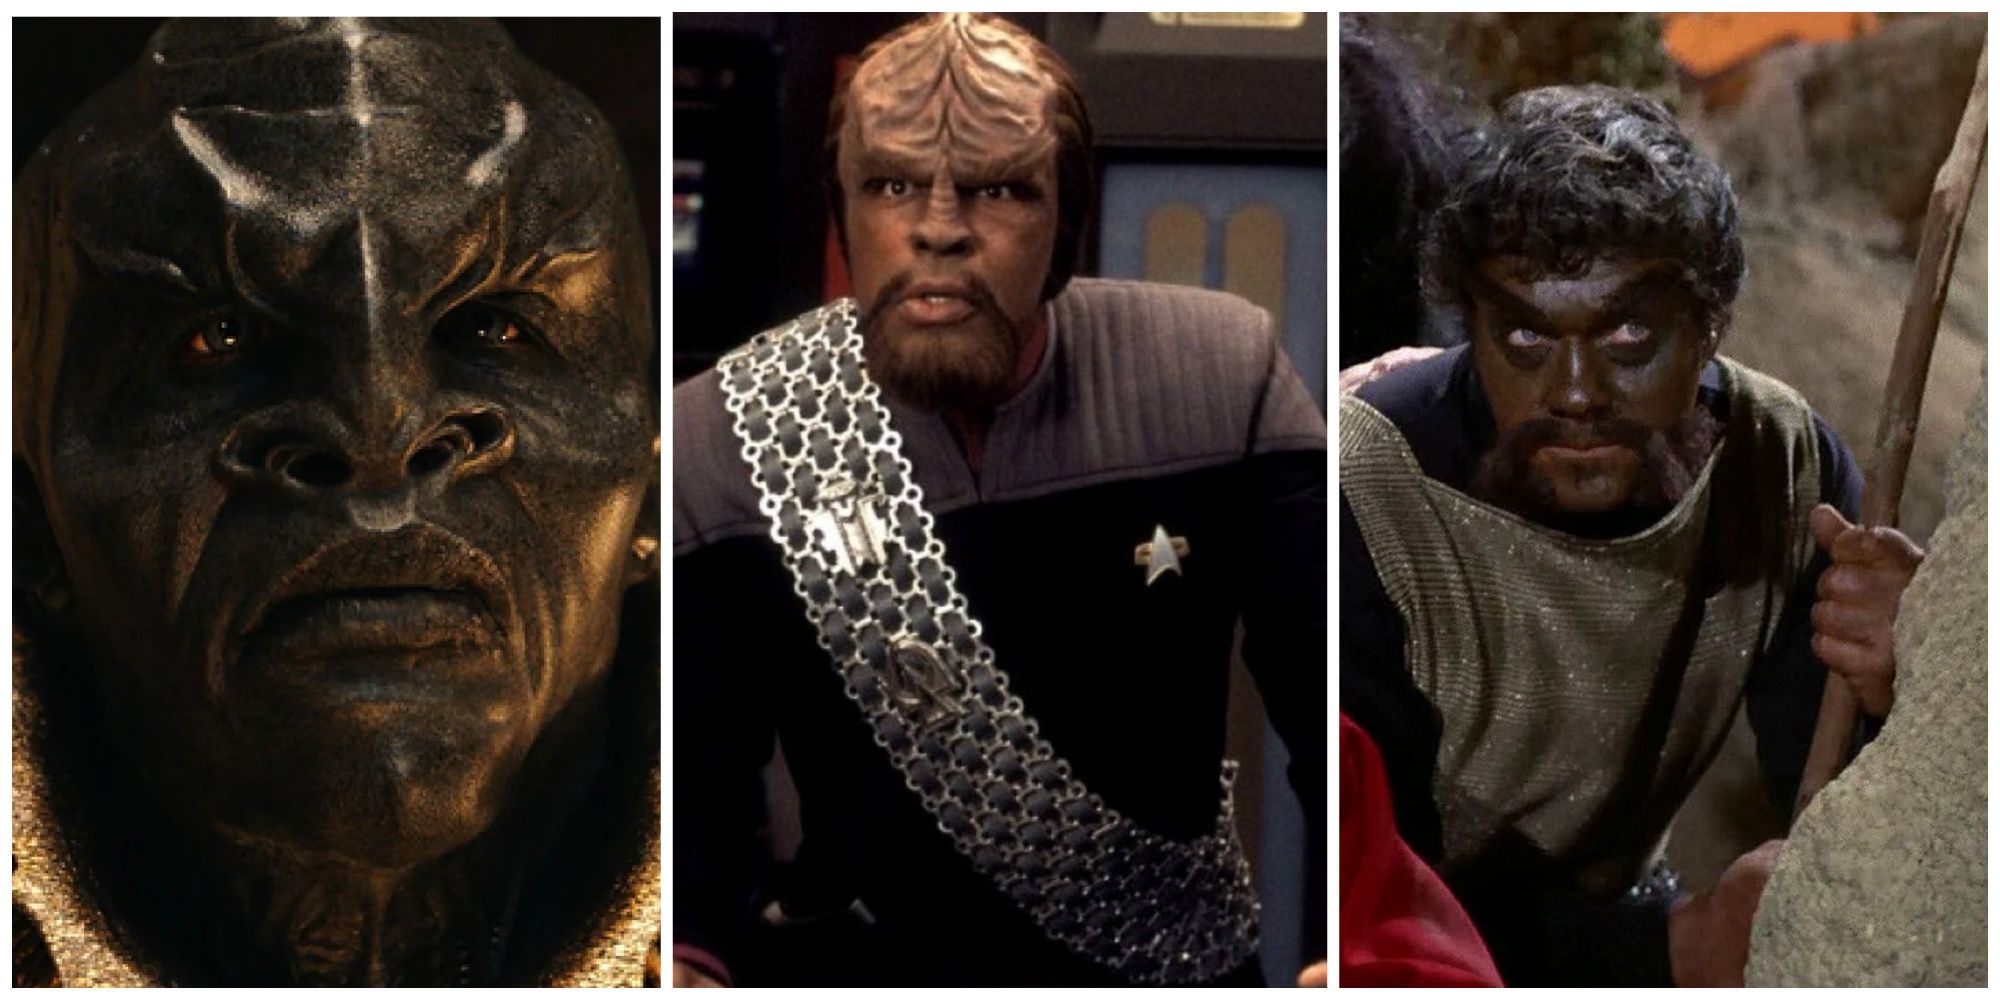 A collage showing three Klingons: T'Kuvma, Worf, and Kahless.